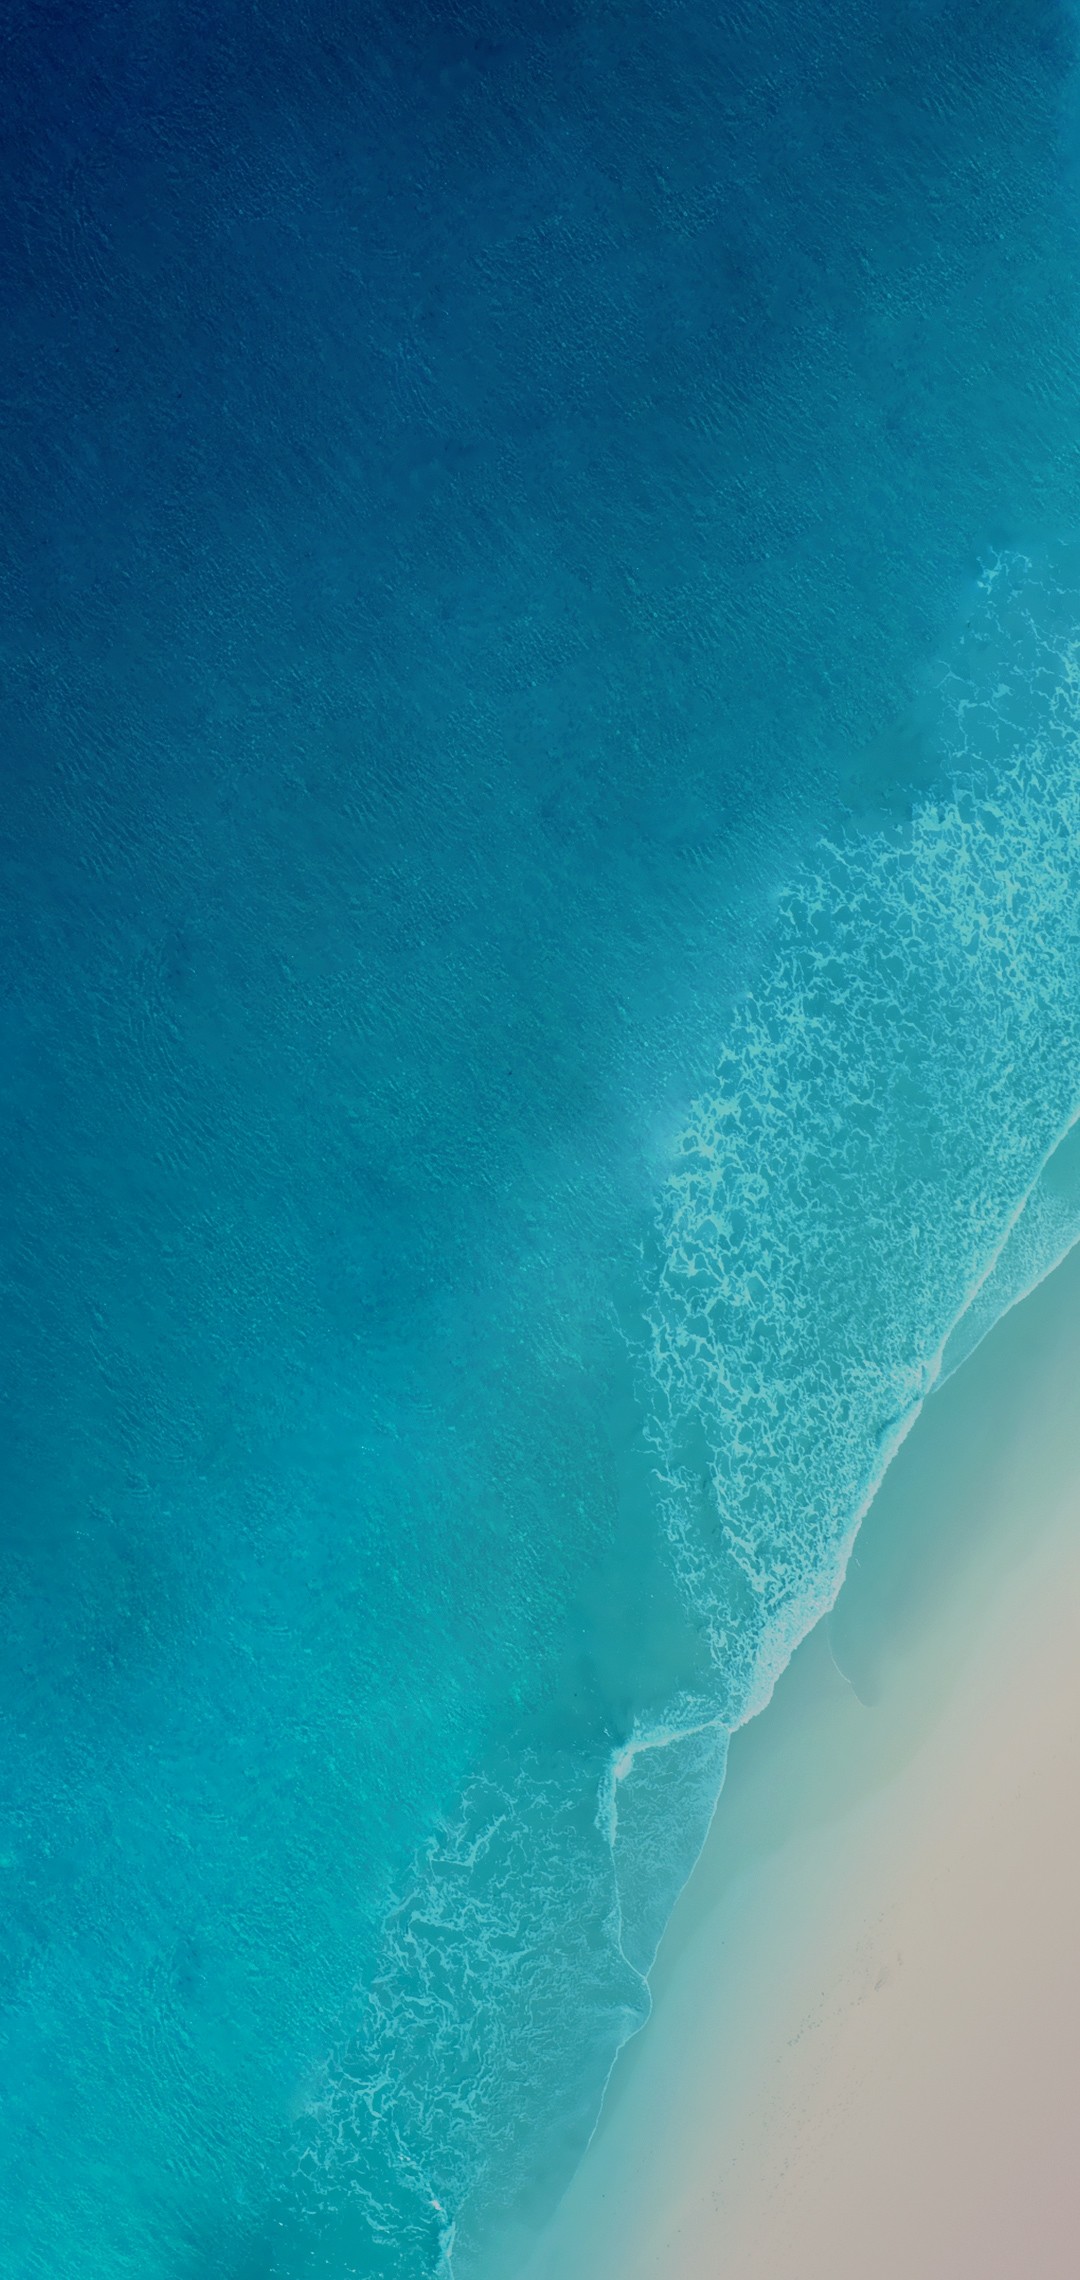 Download Vivo X21 Stock Wallpapers (Updated) | DroidViews